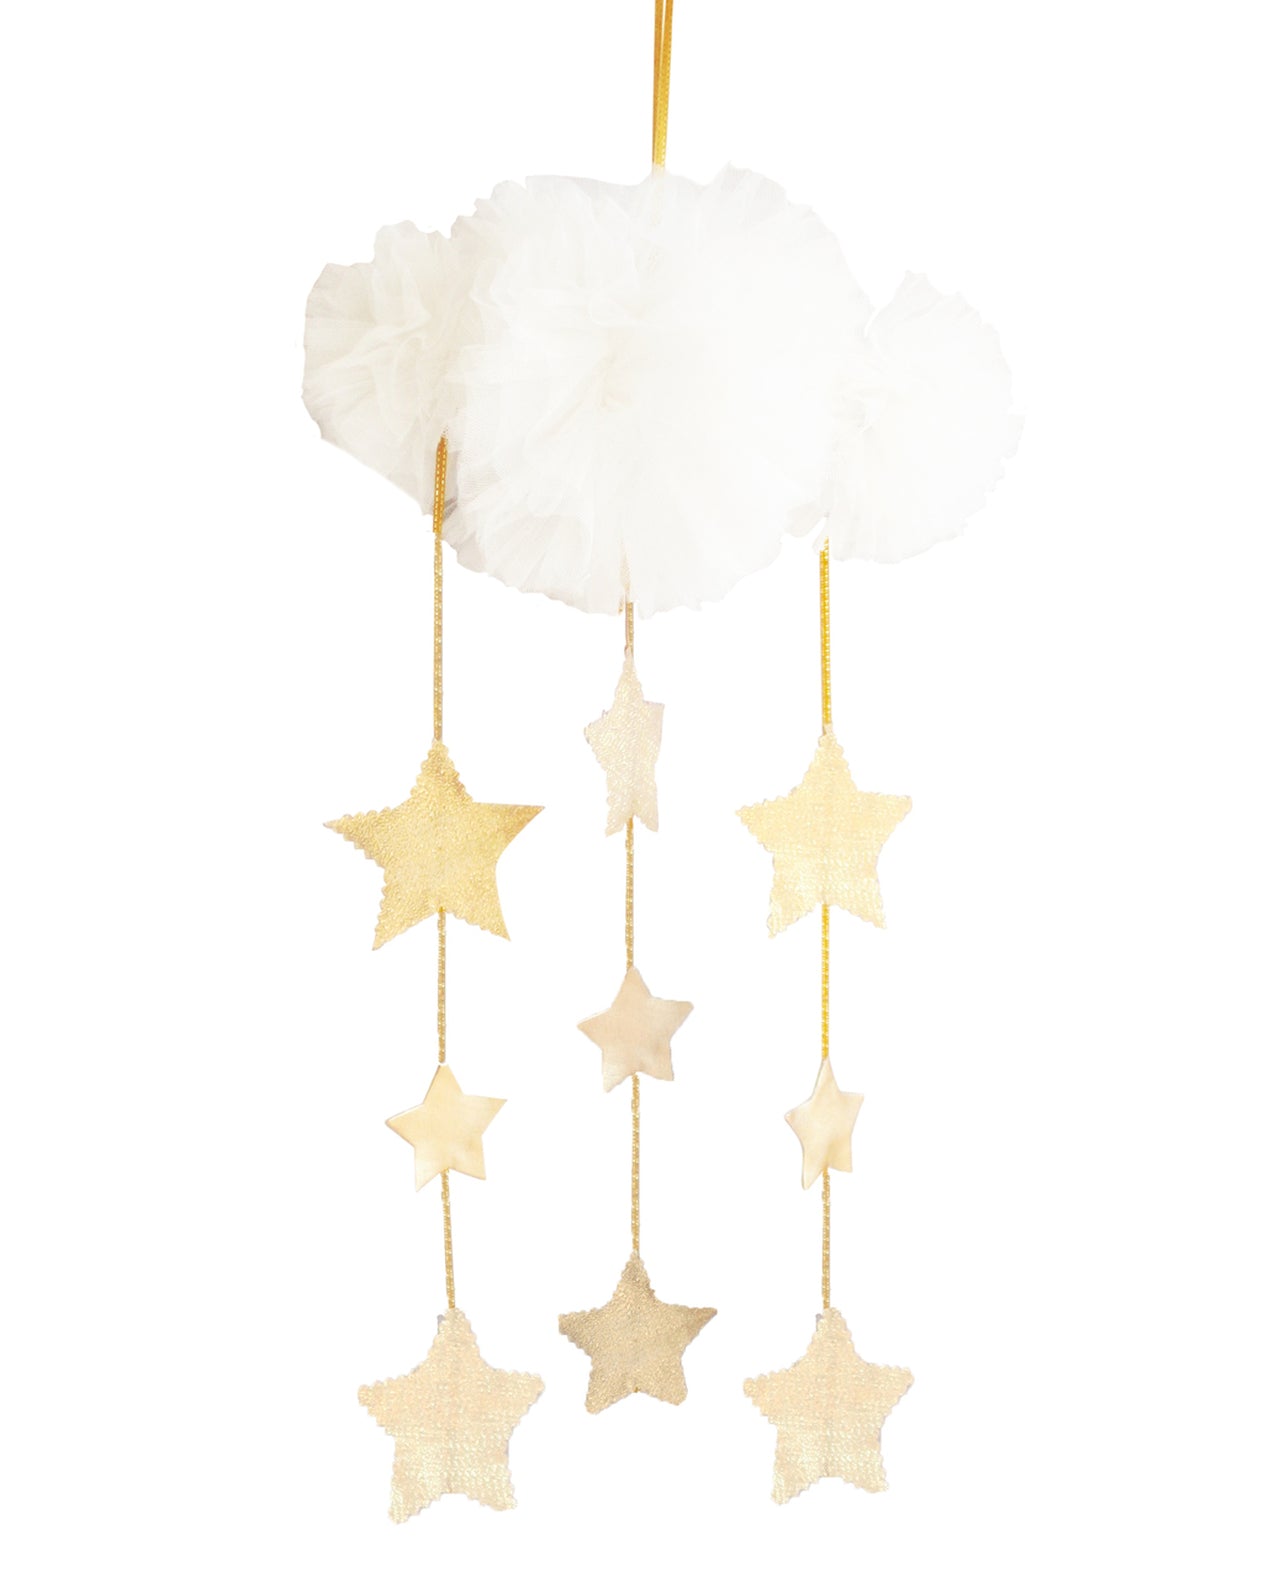 Alimrose Tulle Cloud Mobile - Ivory & Gold